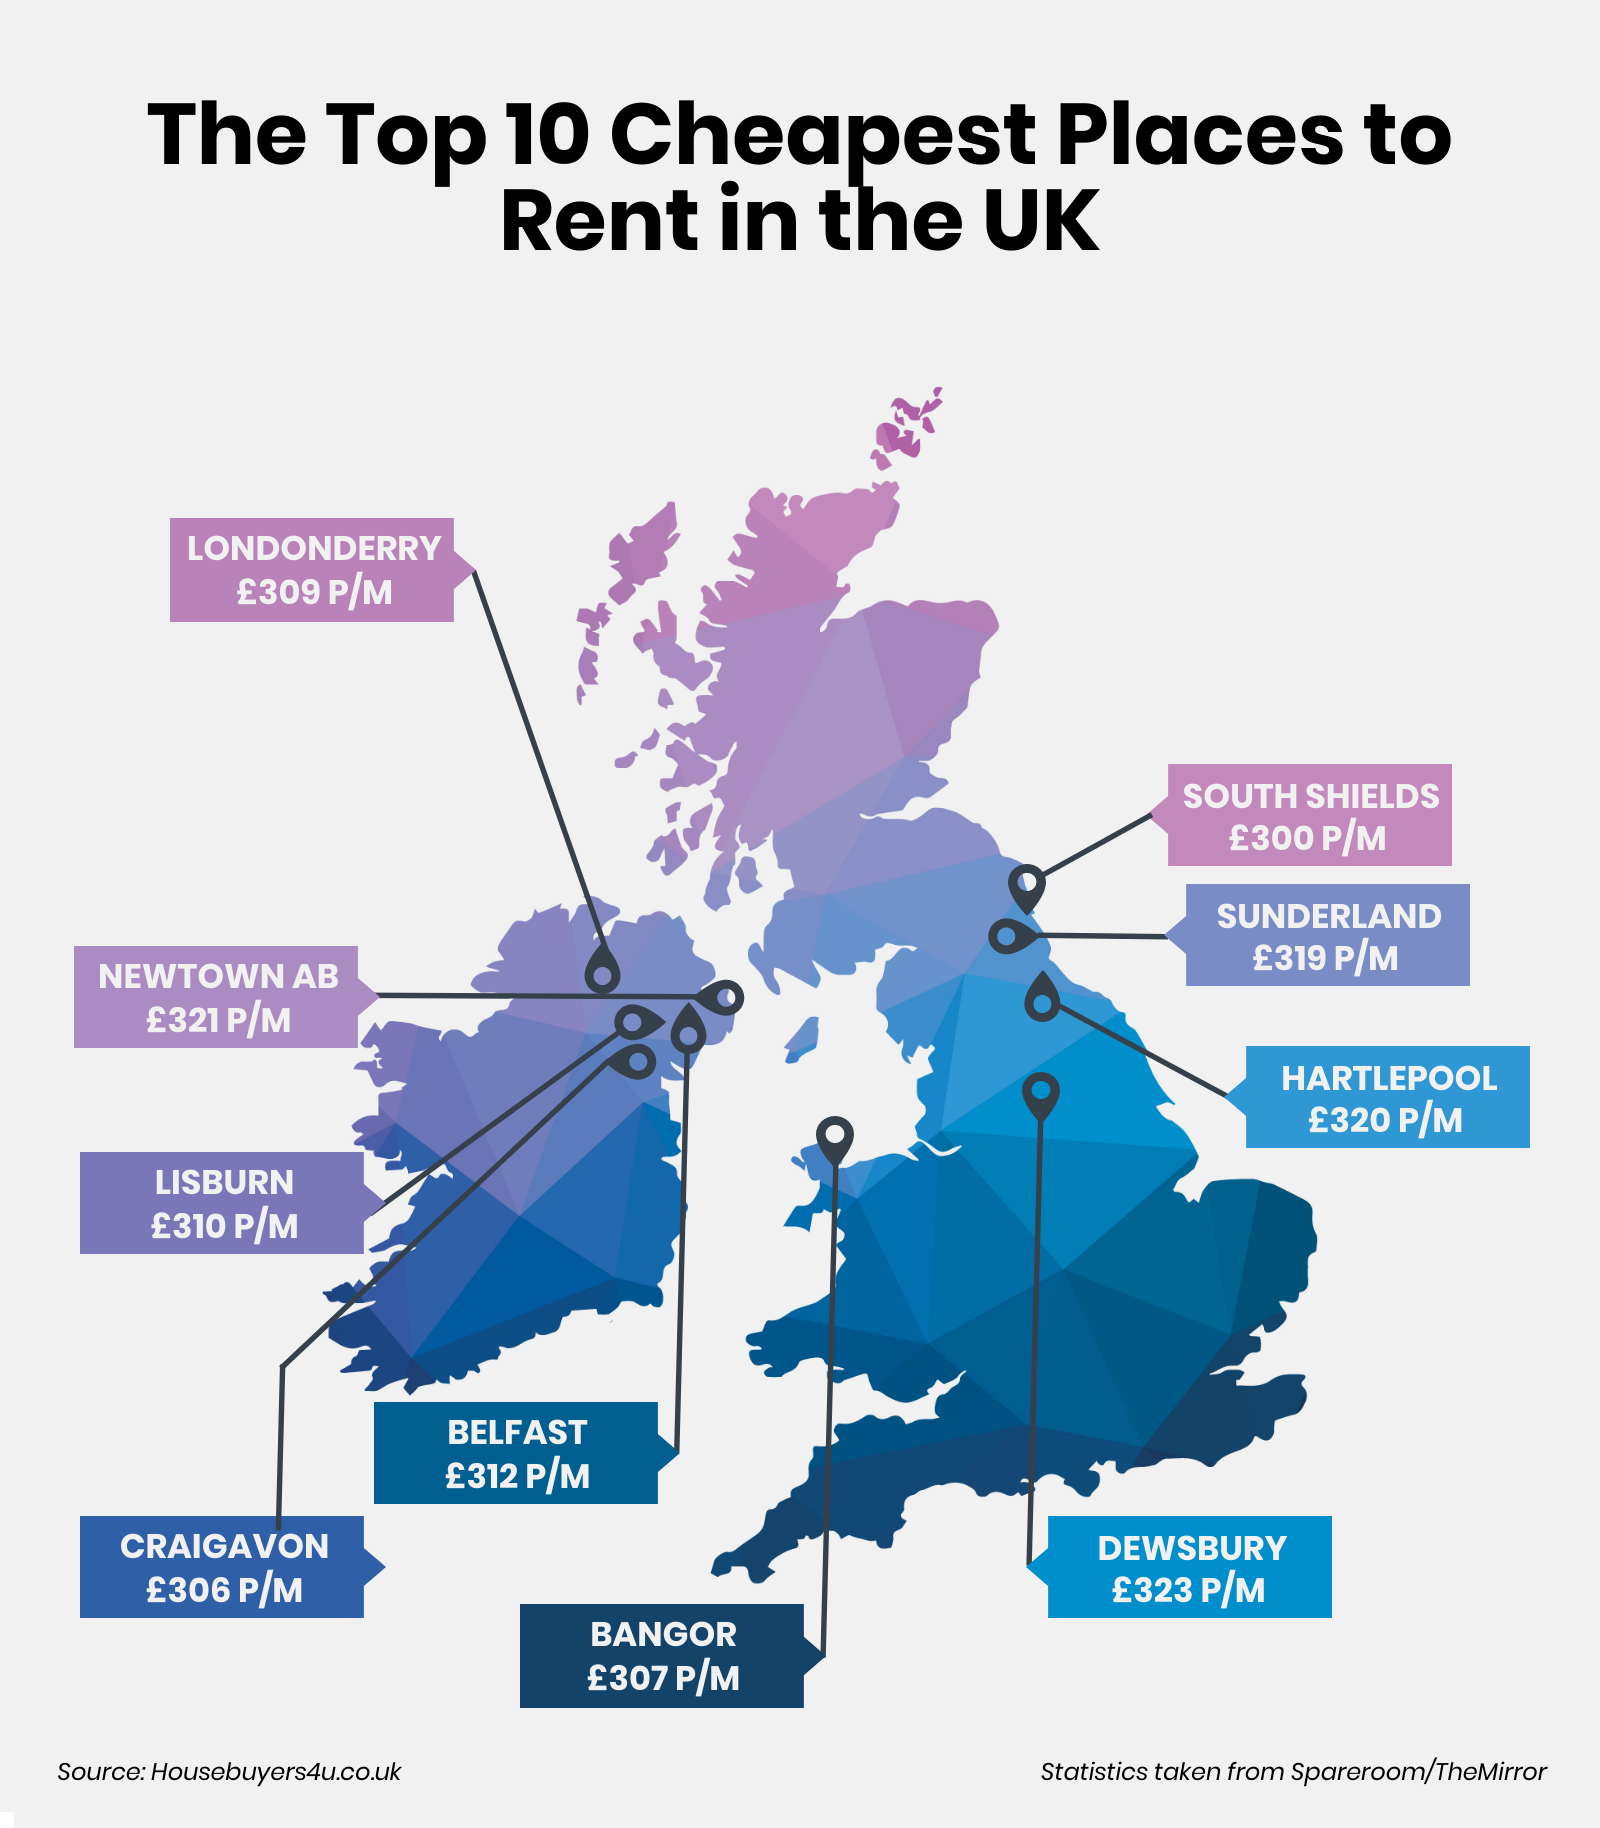 An infographic which shows the top 10 cheapest cities to rent in the UK